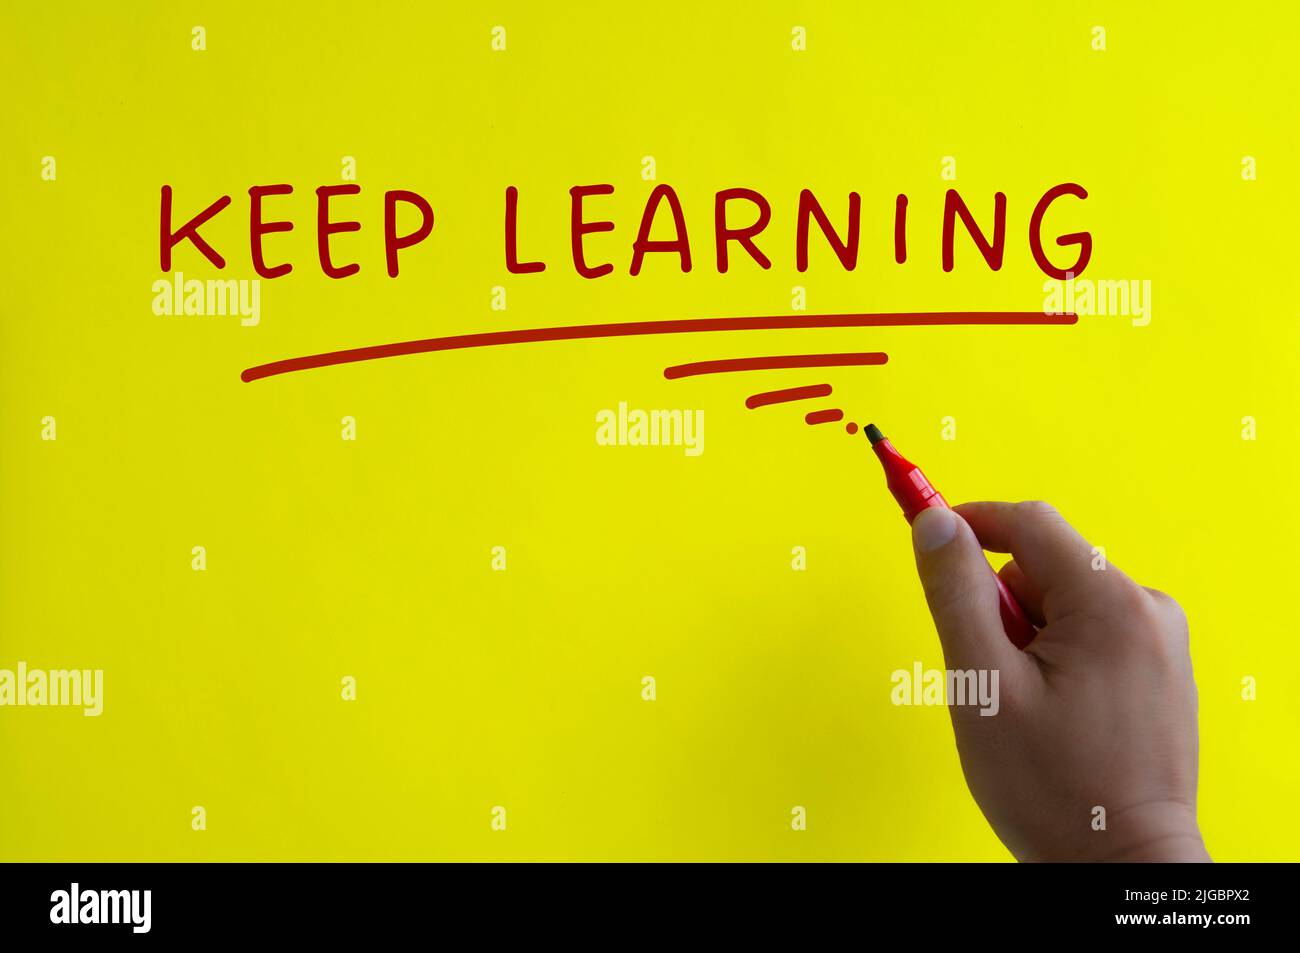 Keep learning text on yellow cover background. Learning concept. Stock Photo